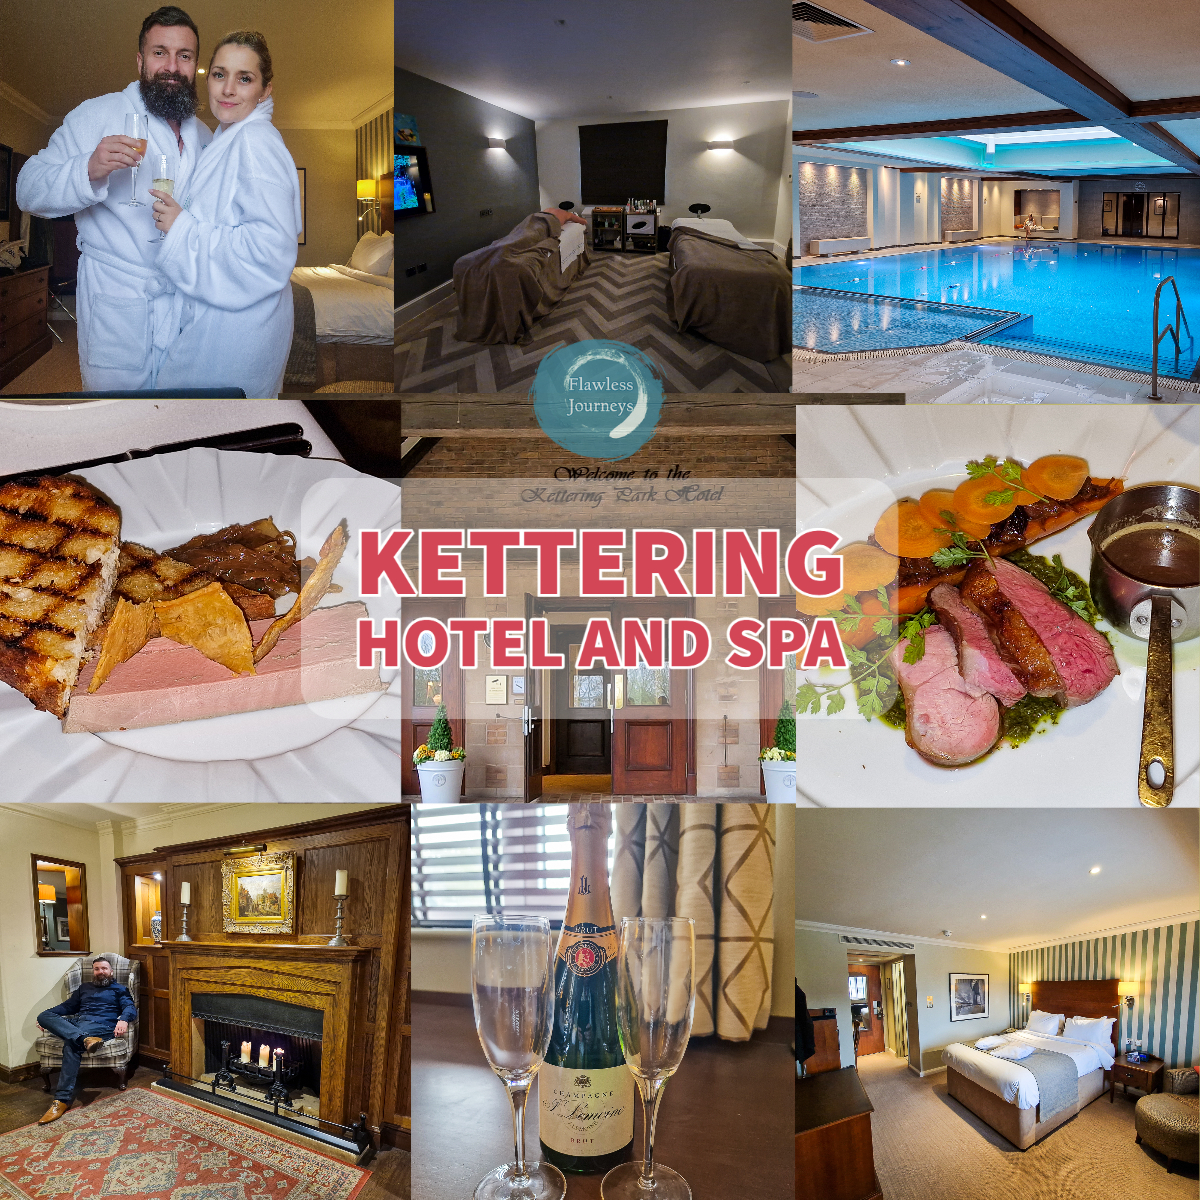 Images of Luke and Kay at Kettering hotel and spa which include lamb dinner, pate starters, spa pool Luke and kay in there spa robes, champagne with glasses, Luke in the spa treatment room, Luke sitting next to a fire place and the double room we stayed in at the hotel